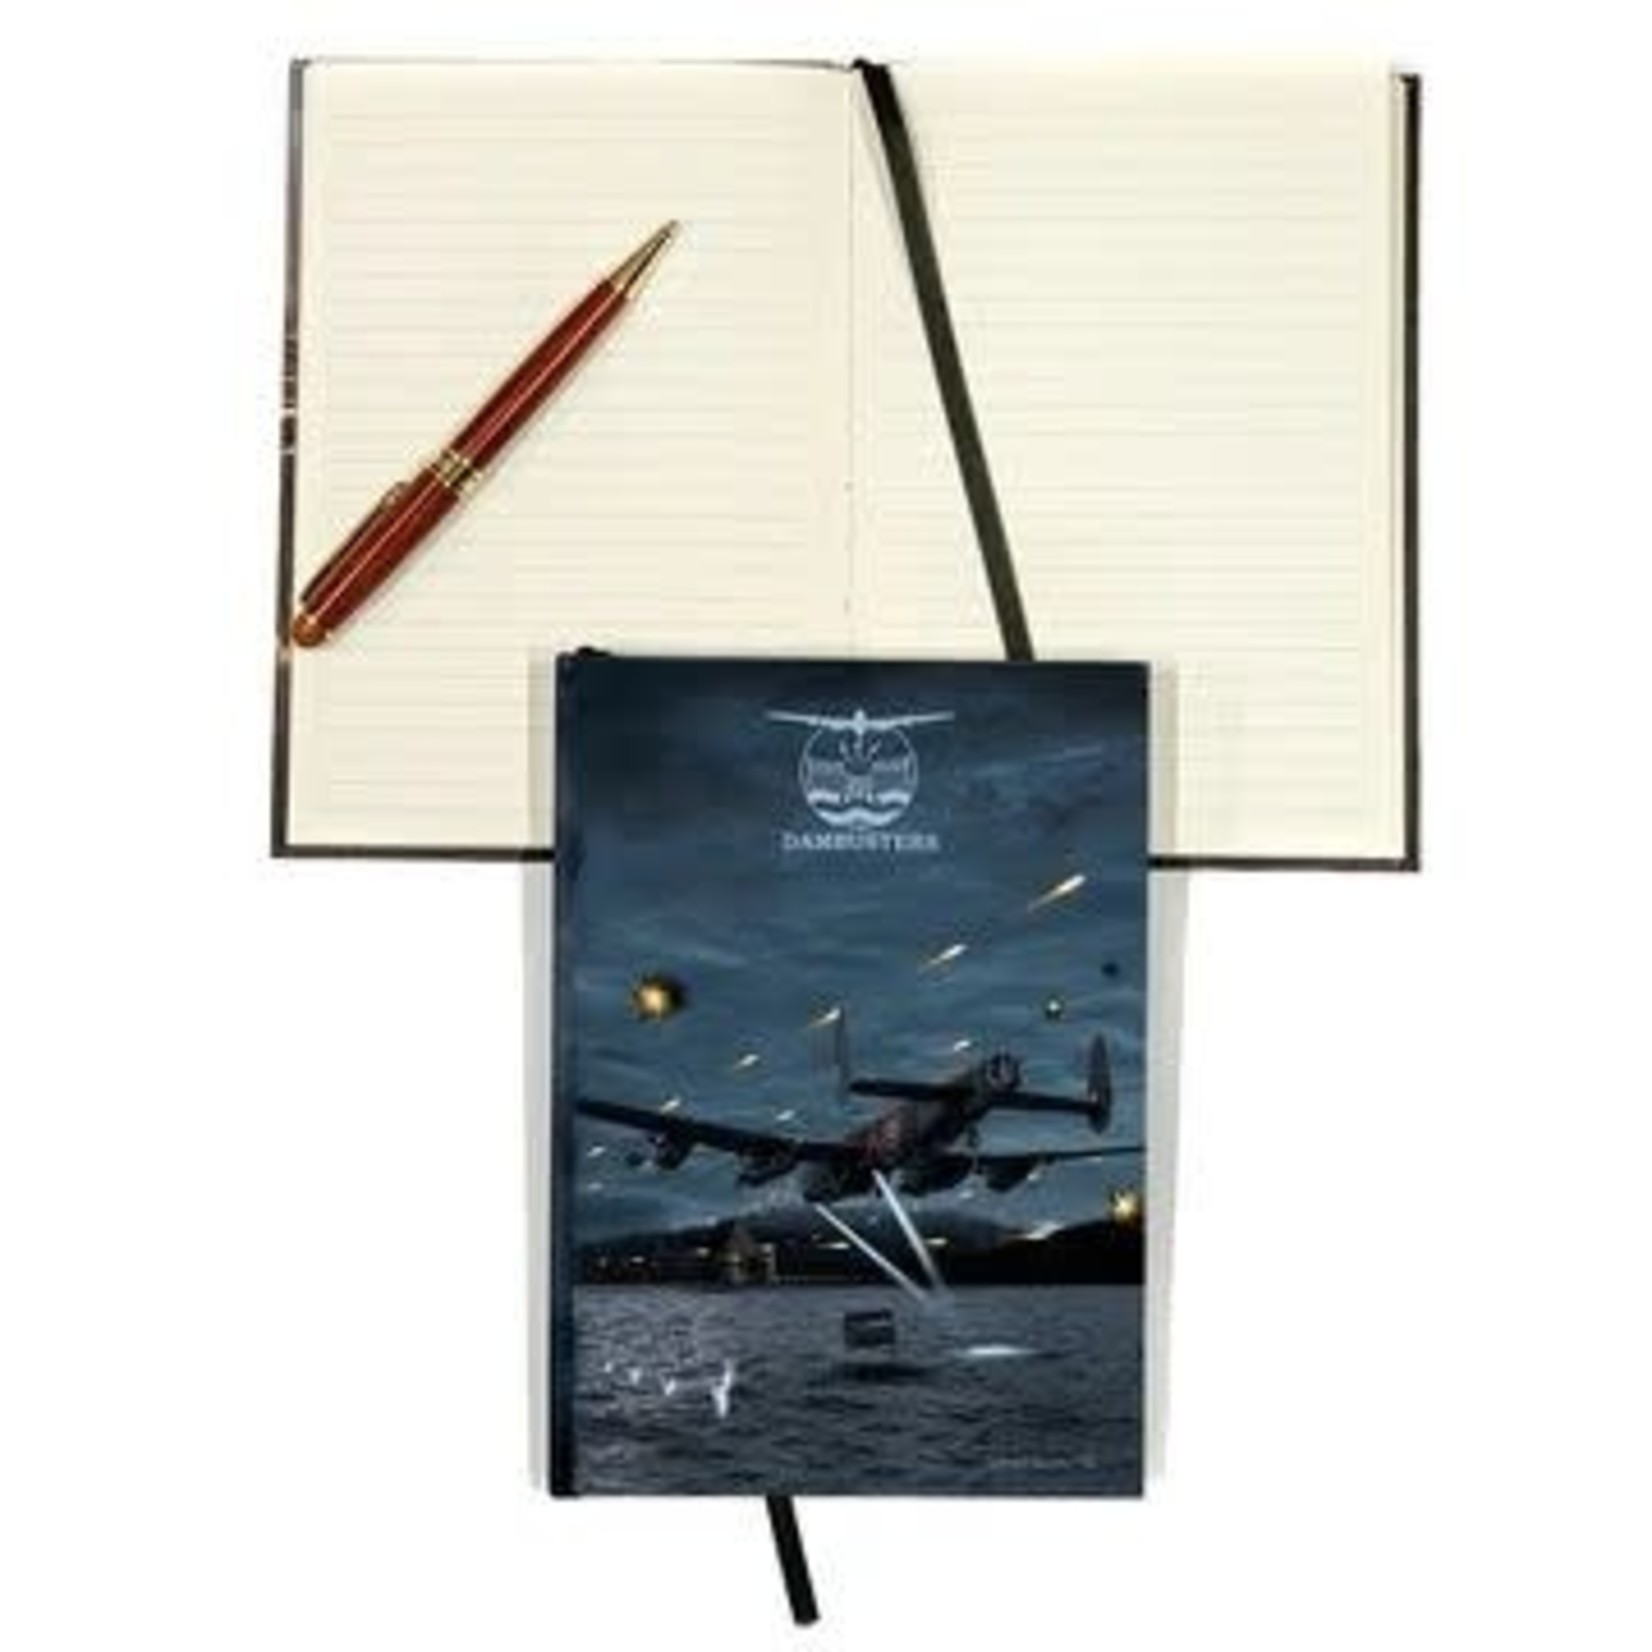 Aviation and Space Carnet de note Dambusters